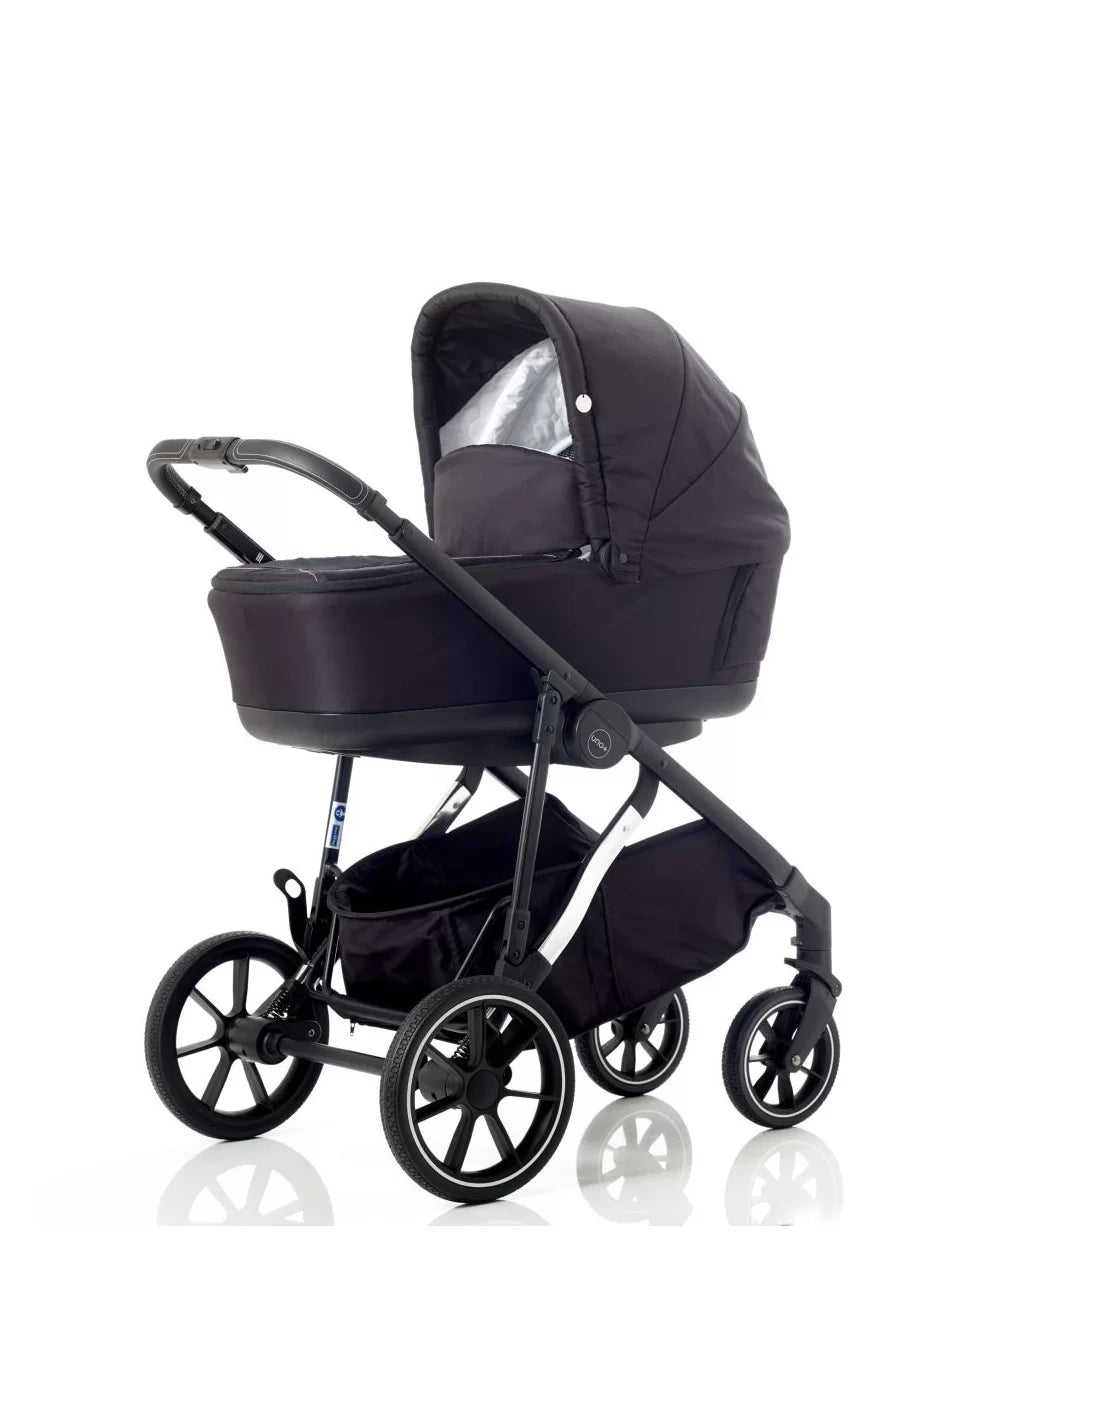 Mee-Go Uno Plus Carry Cot - Black/Chrome - For Your Little One